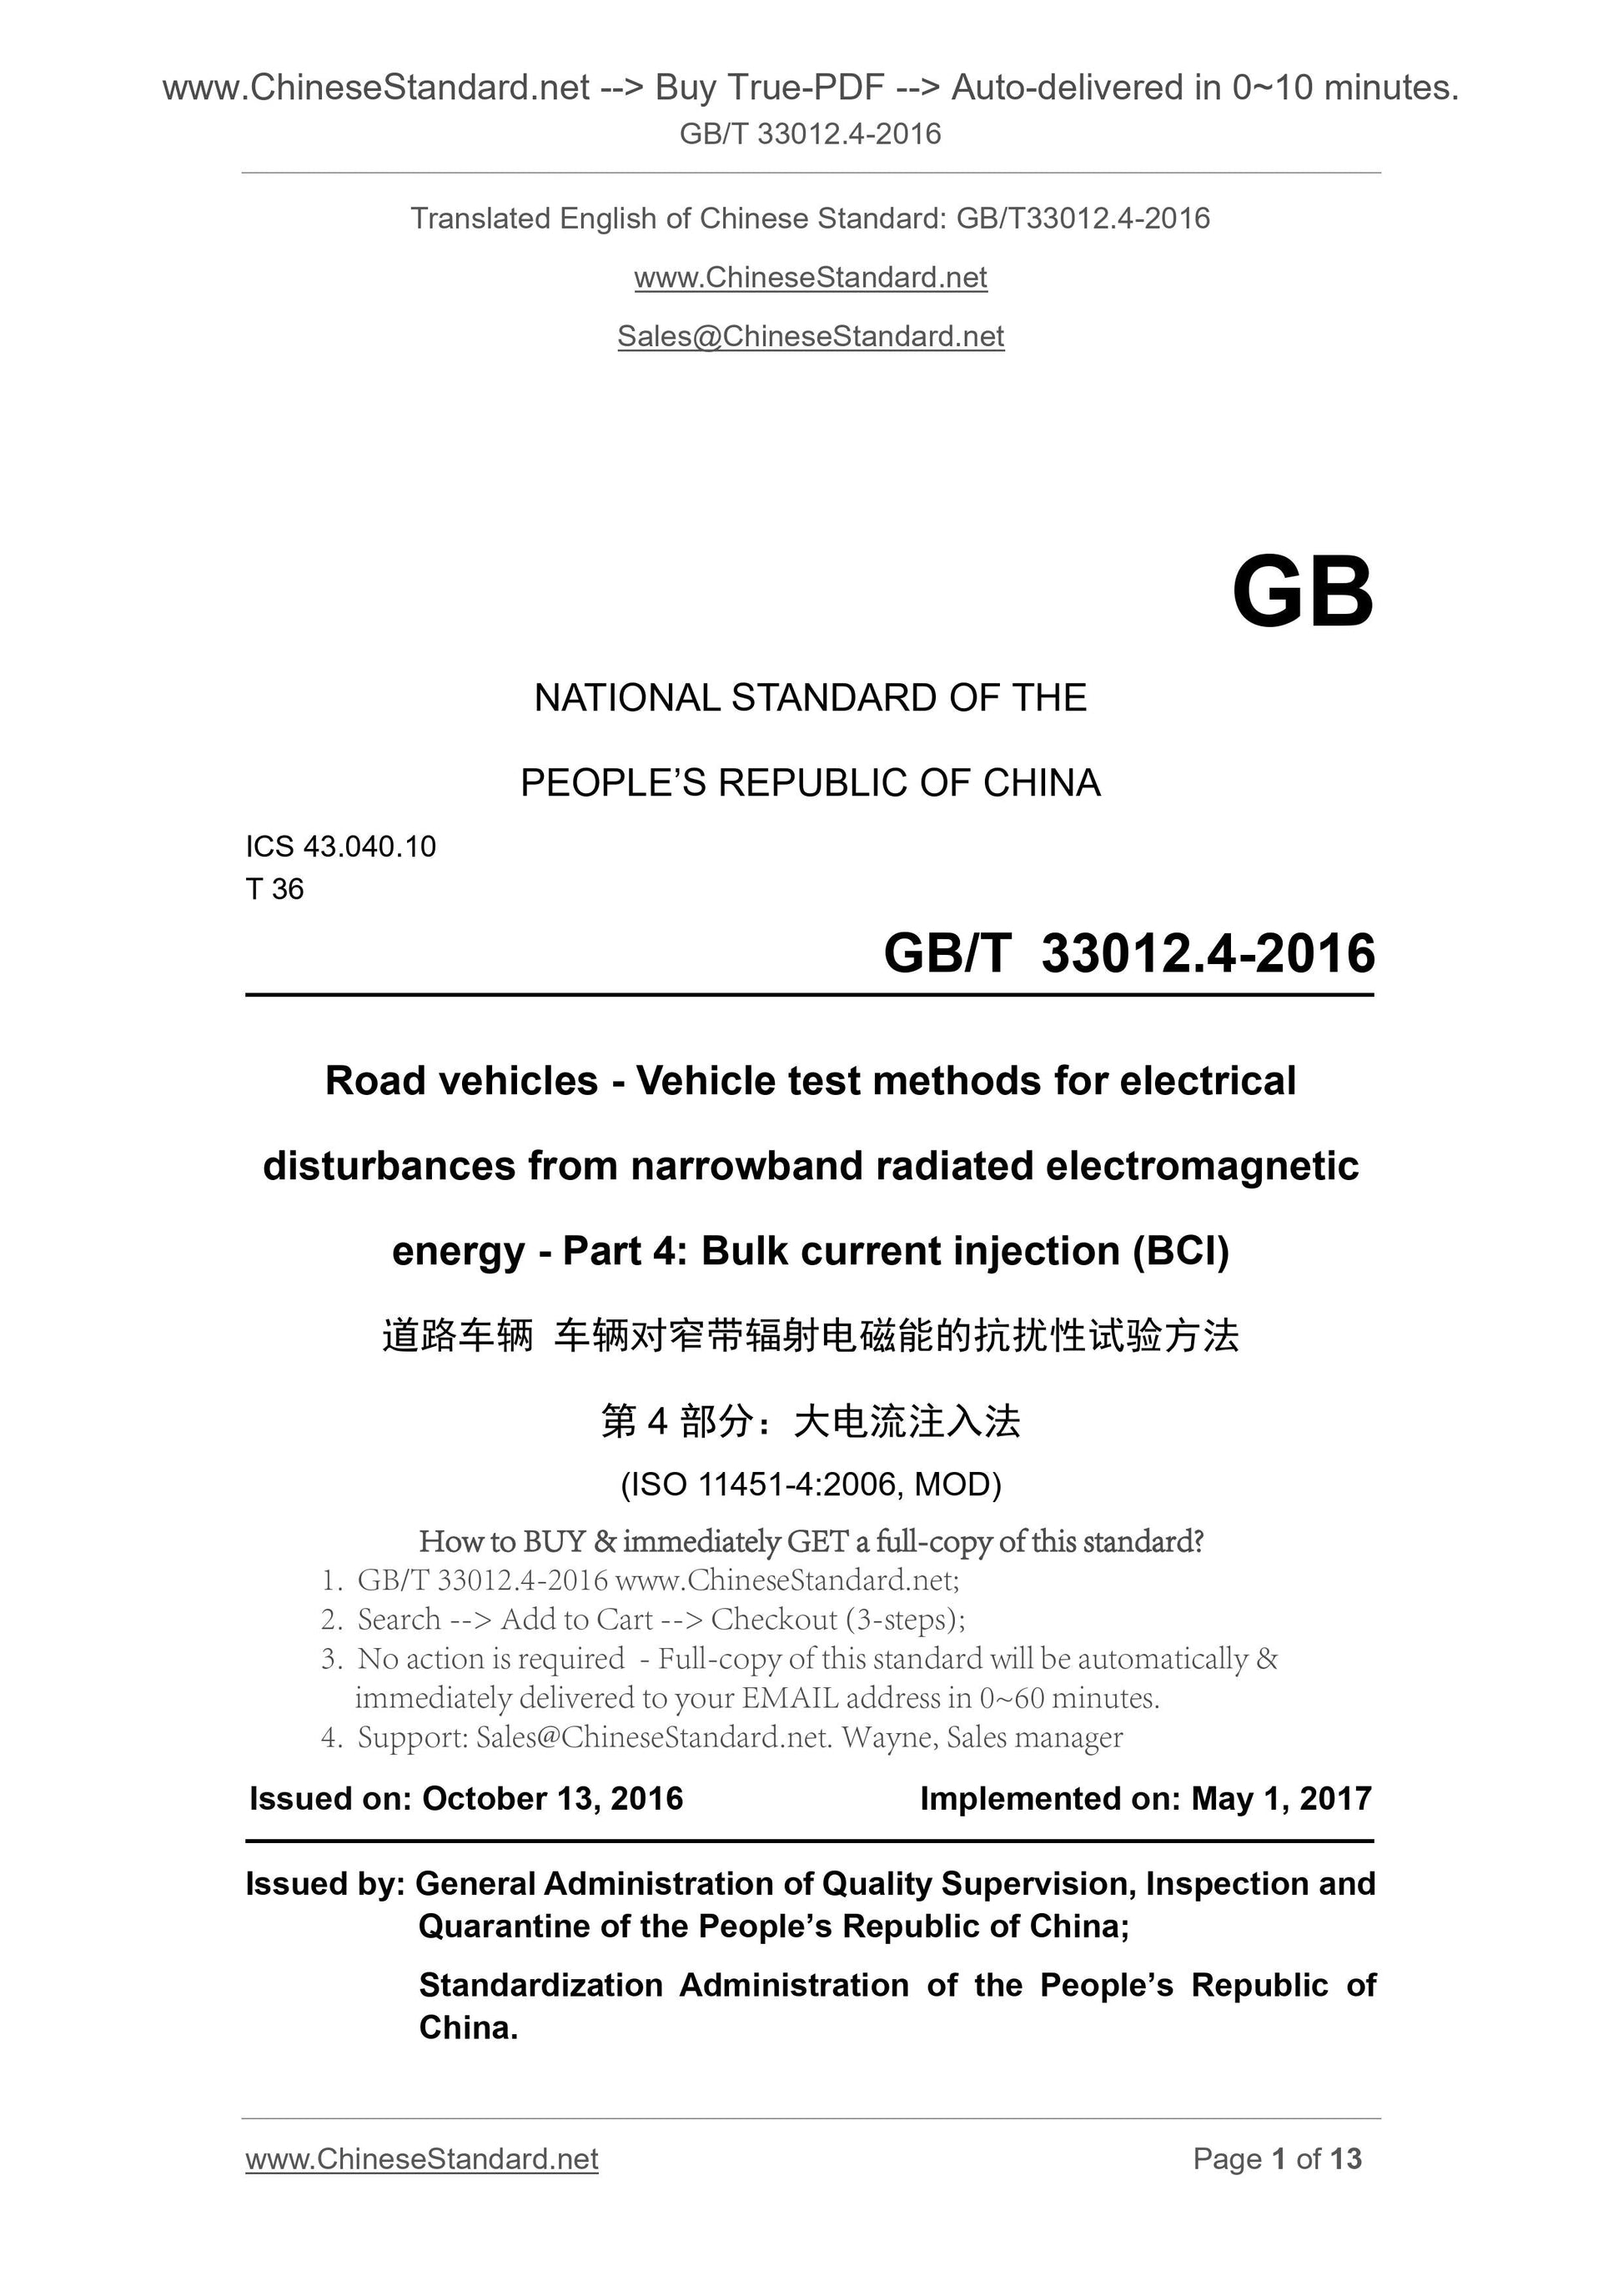 GB/T 33012.4-2016 Page 1